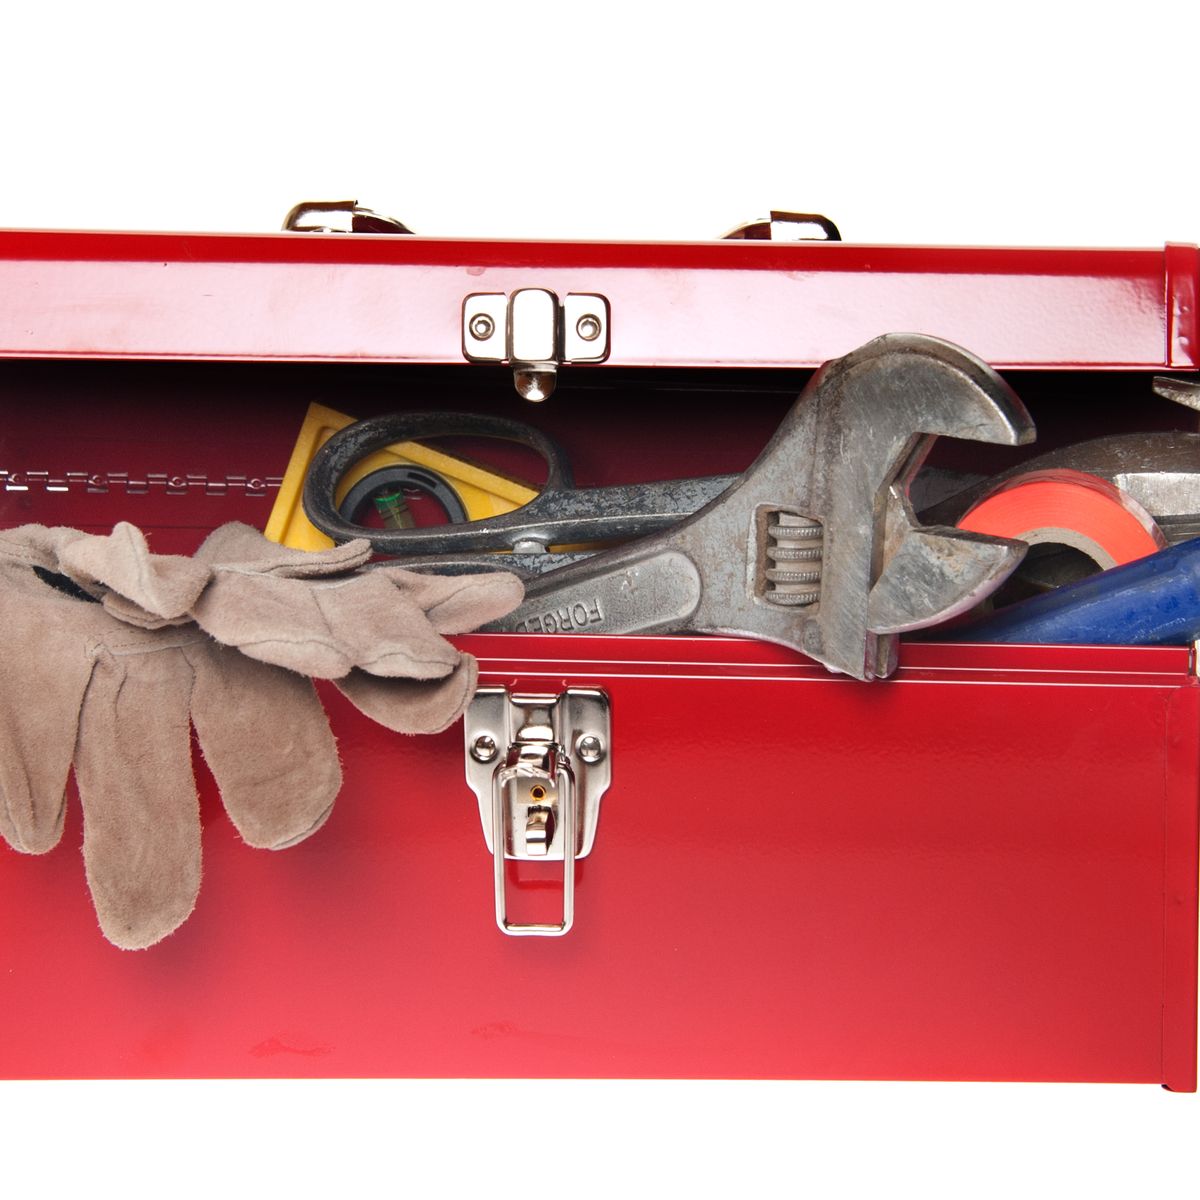 How to Choose a Tool Box Mounting Kit for Your Truck